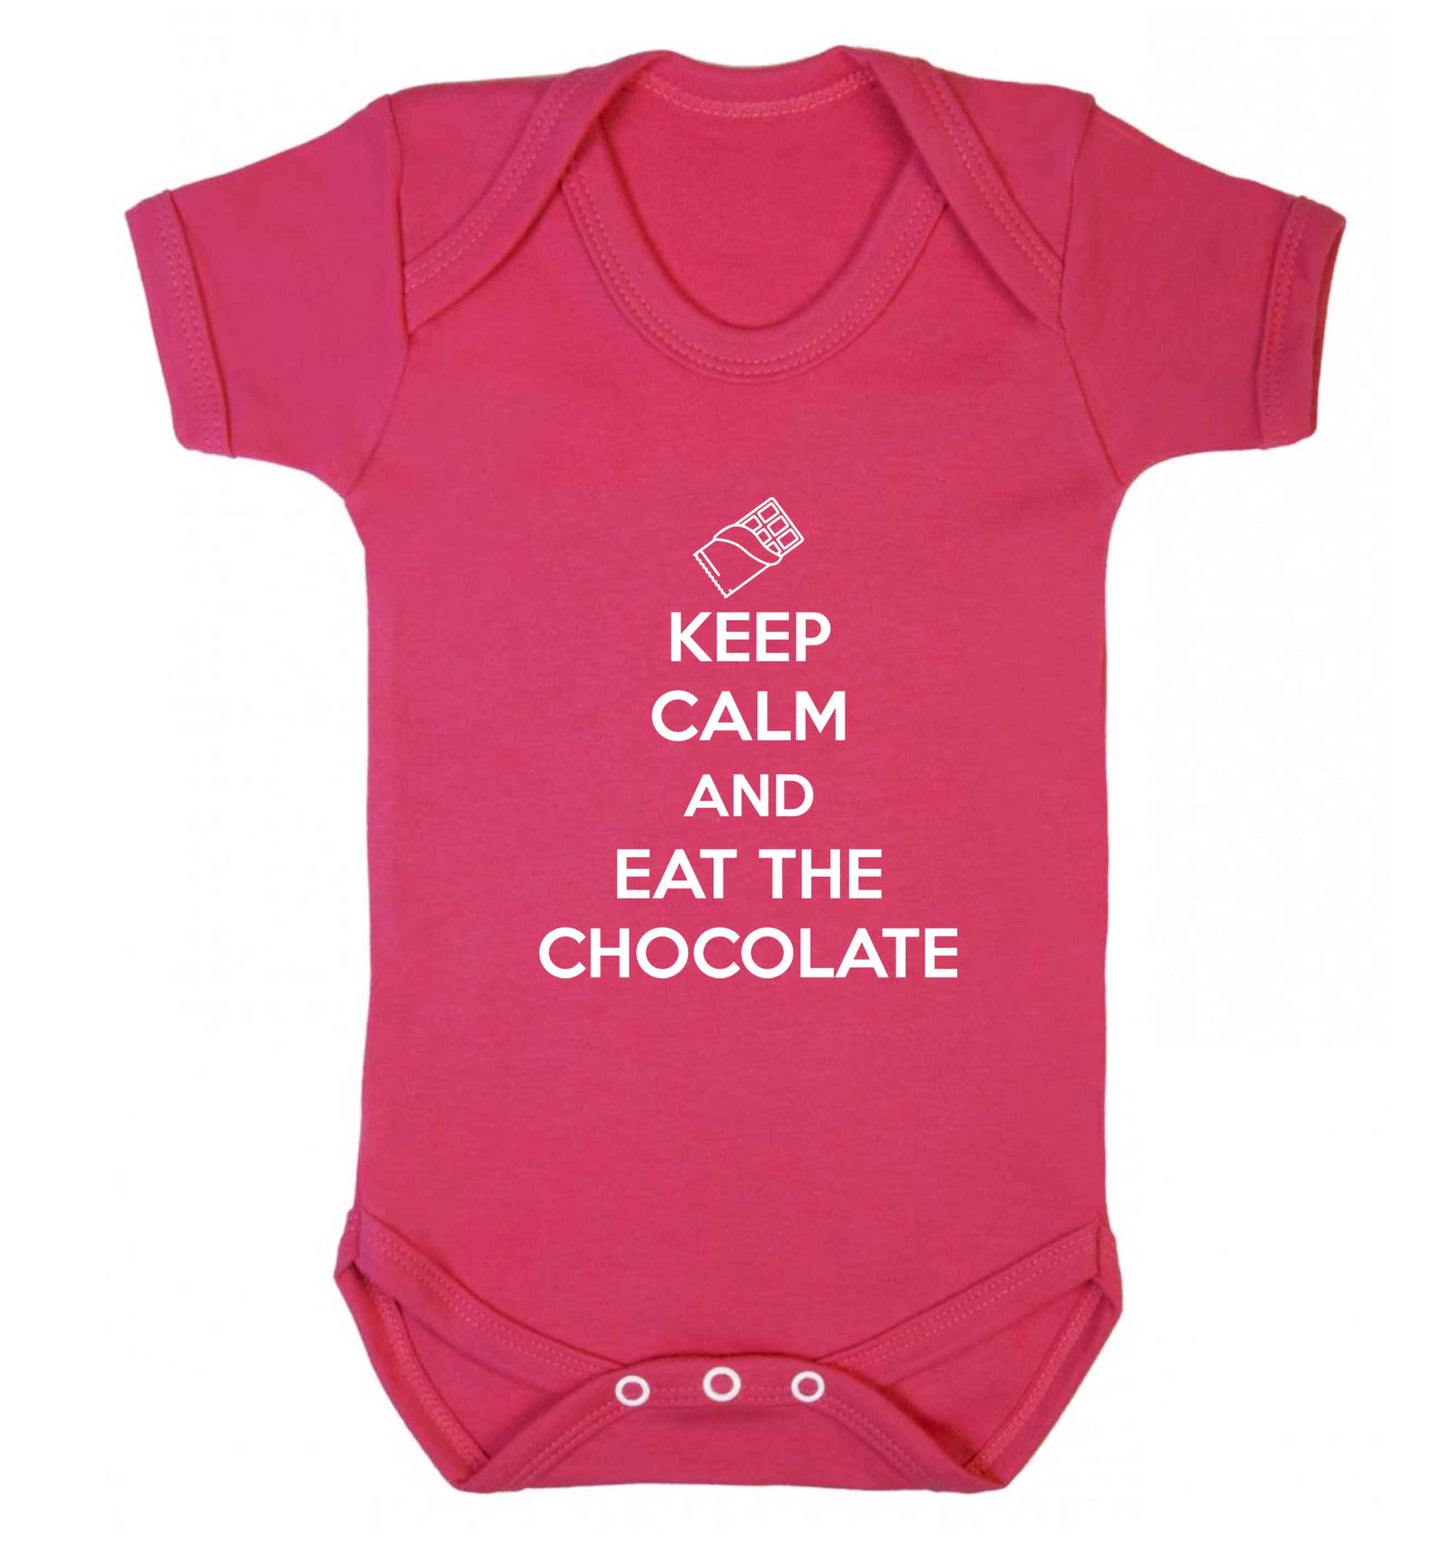 funny gift for a chocaholic! Keep calm and eat the chocolate baby vest dark pink 18-24 months